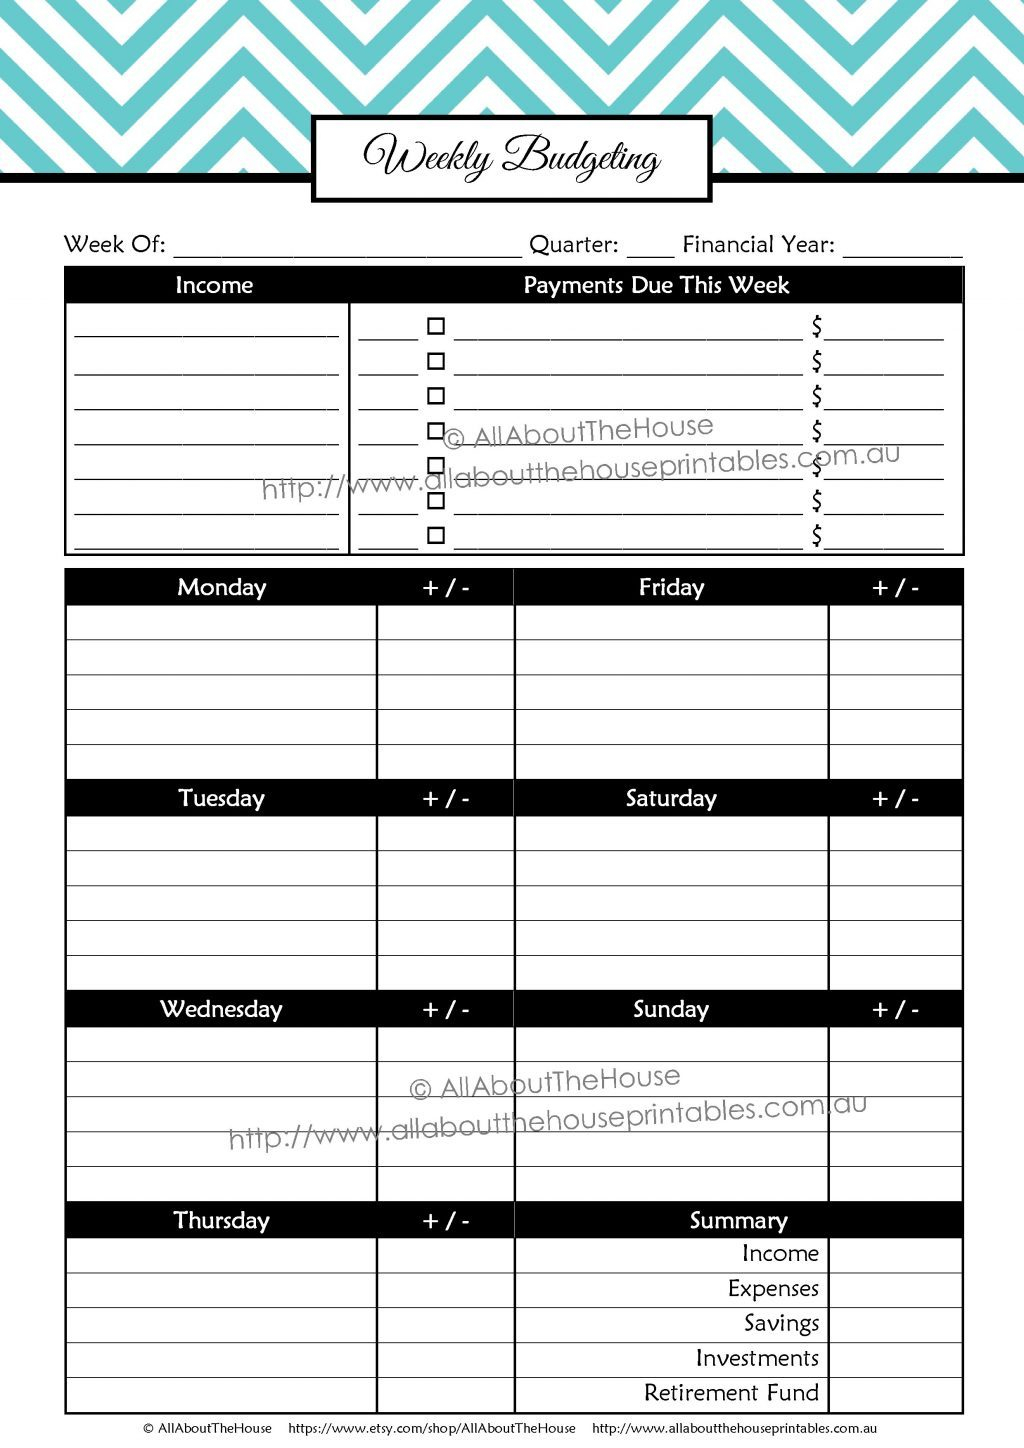 Bill Spreadsheet Pdf For Weekly Budget Spreadsheet Blank Monthly Examplest Frugal Fanatic